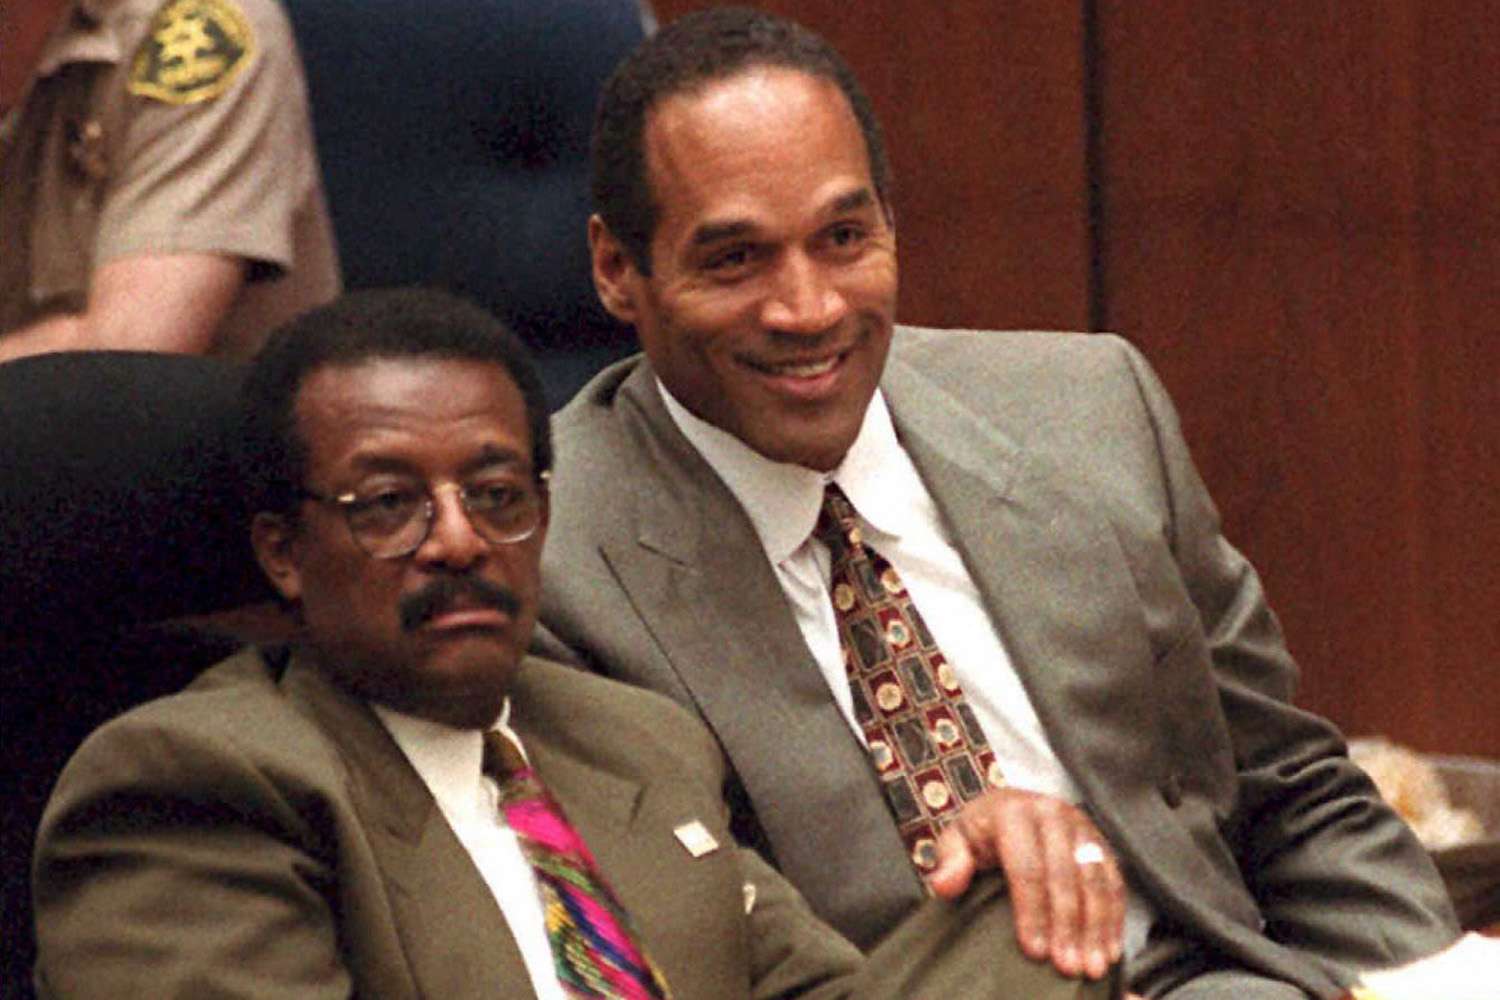 OJ Simpson (R), seated next to his lawyer Johnnie Cochran Jr., laughs as Brian "Kato" Kaelin testifies about the acting jobs he has received since the night of the murders 22 March during the OJ Simpson murder trial. 